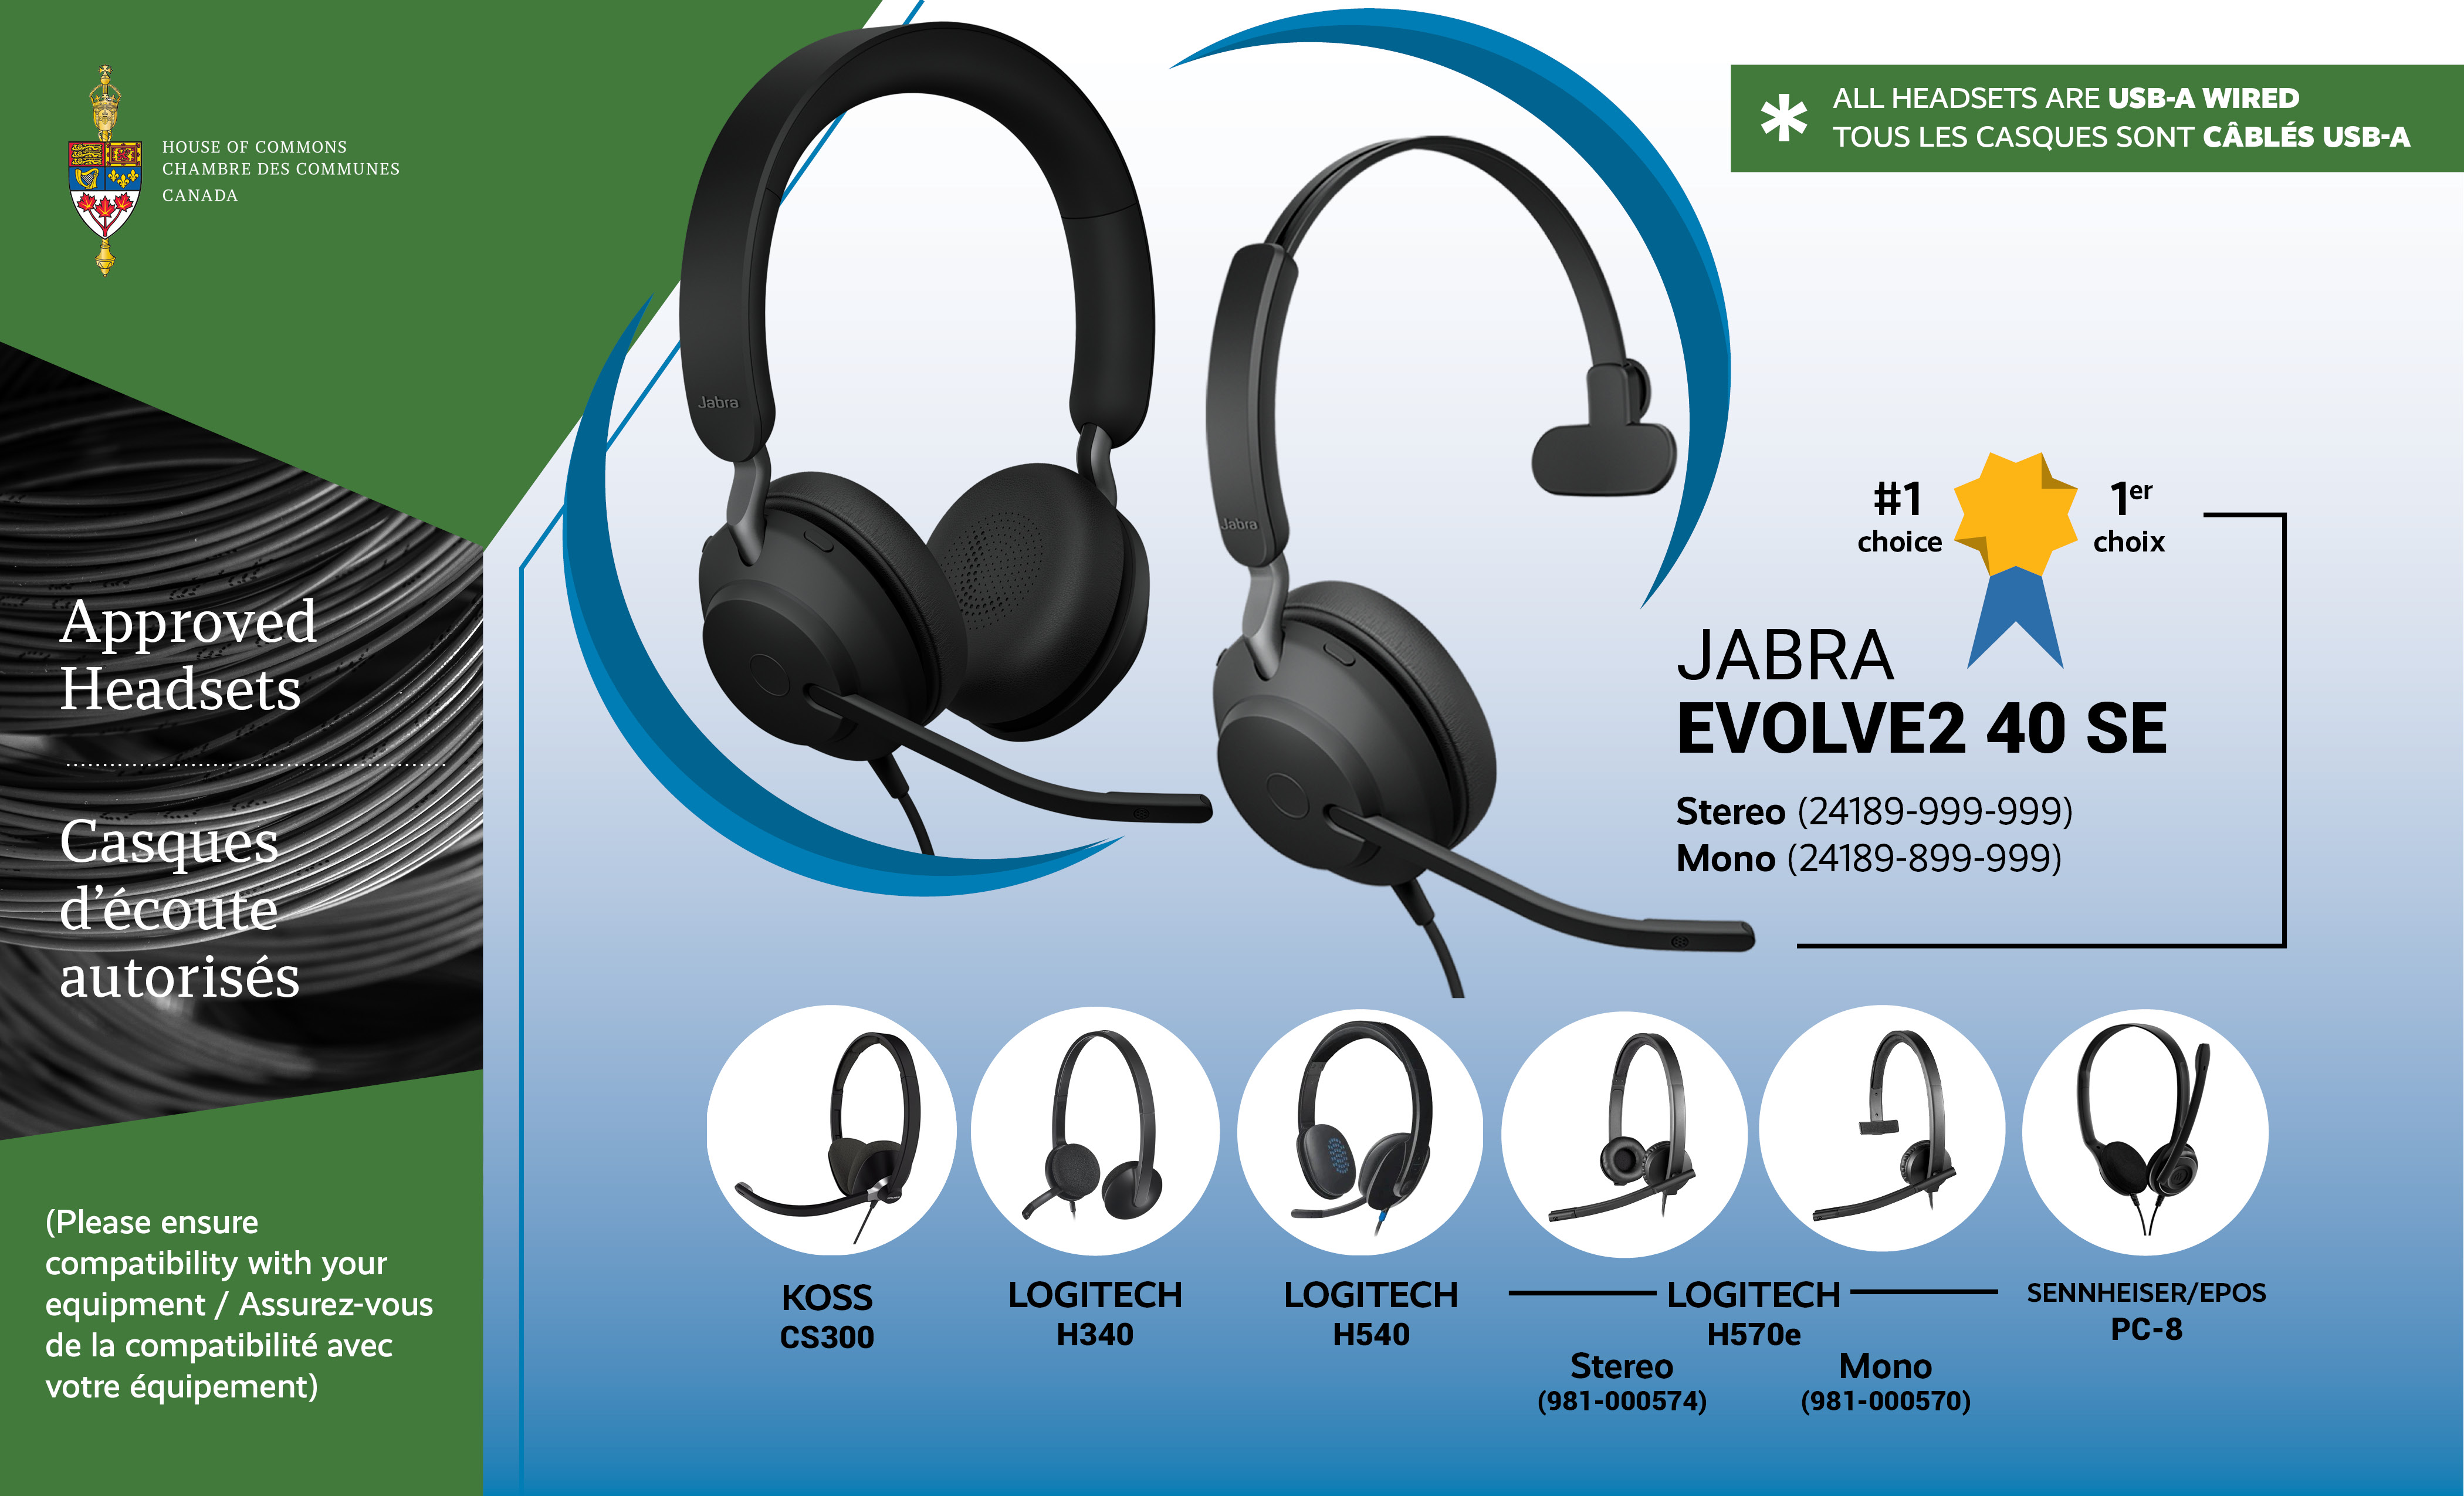 This graphic lists the six pre-approved headsets that can be used for appearances before committee meetings. The number one choice is the Jabra Evolve2 40. The other choices are the following: Sennheiser/EPOS PC-8 USB, Logitech zone wired, Koss CS100, Koss CS300, Logitech H340. All headsets are USB-A wired.